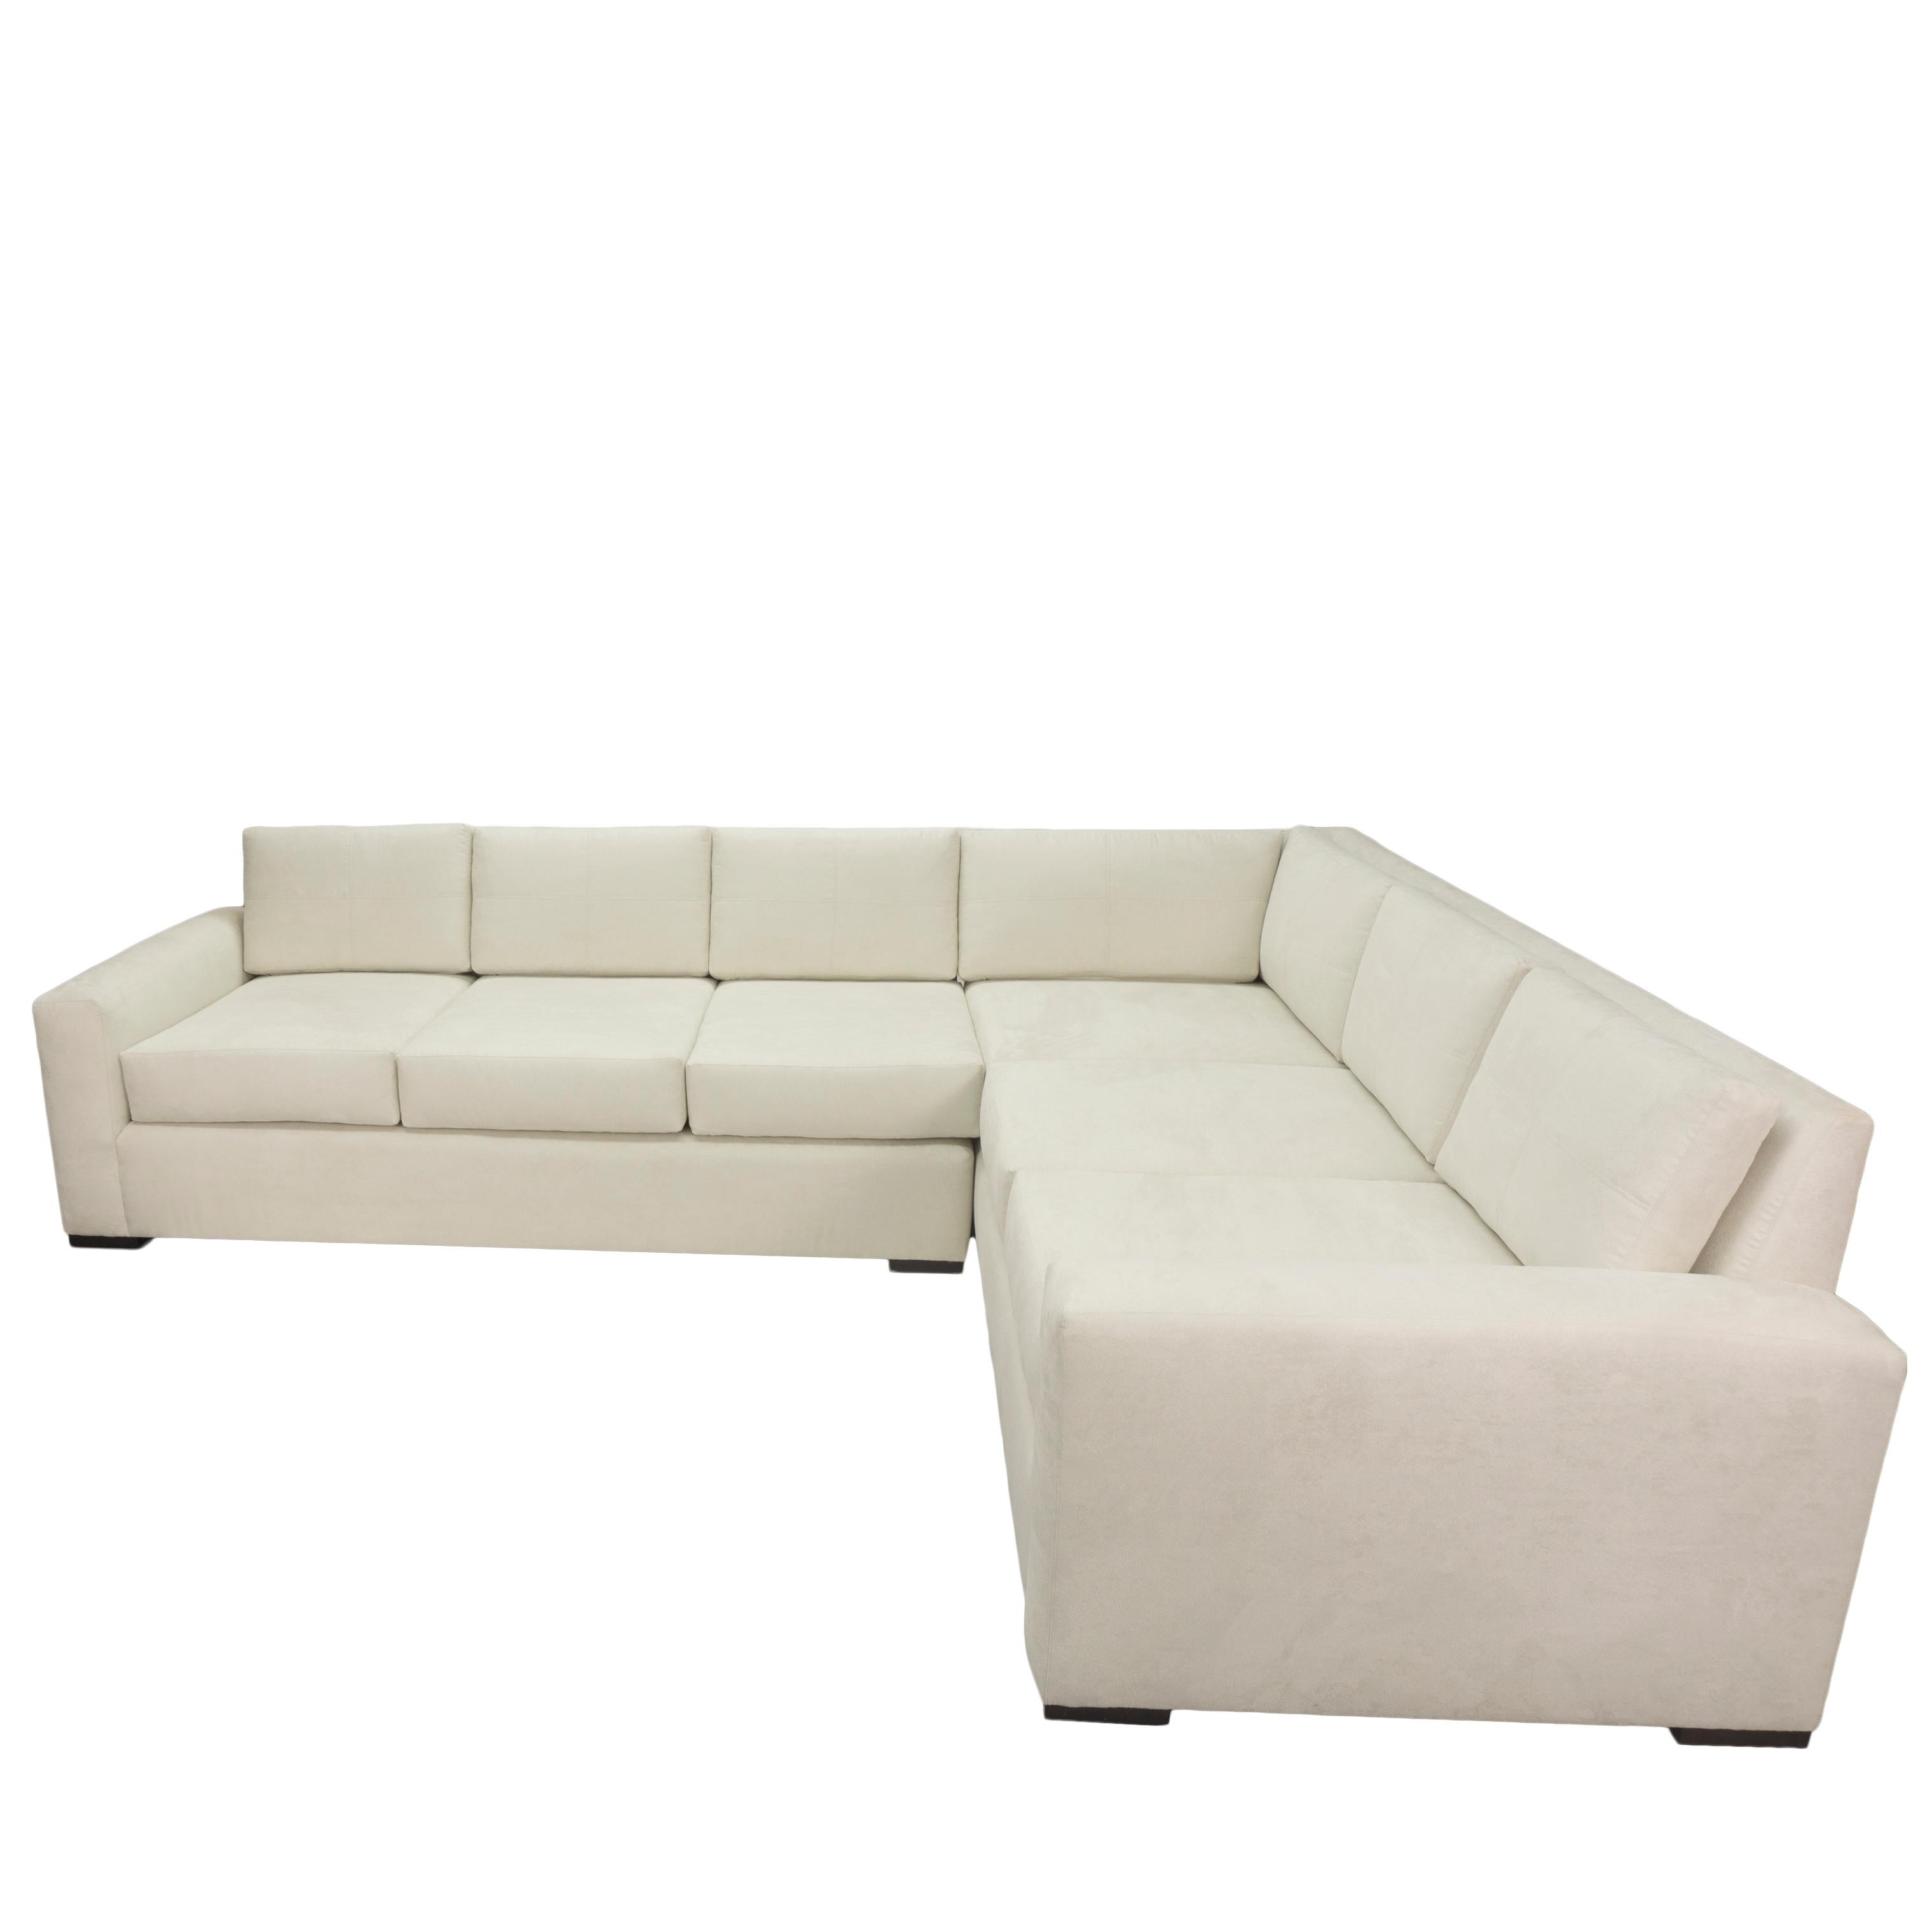 About This Piece
This customizable sectional sofa features square arms that are proportioned with the same thickness as the seat cushions, making it very easy to look at. The sectional is shown in a suede that comes in dozens of colors. Our